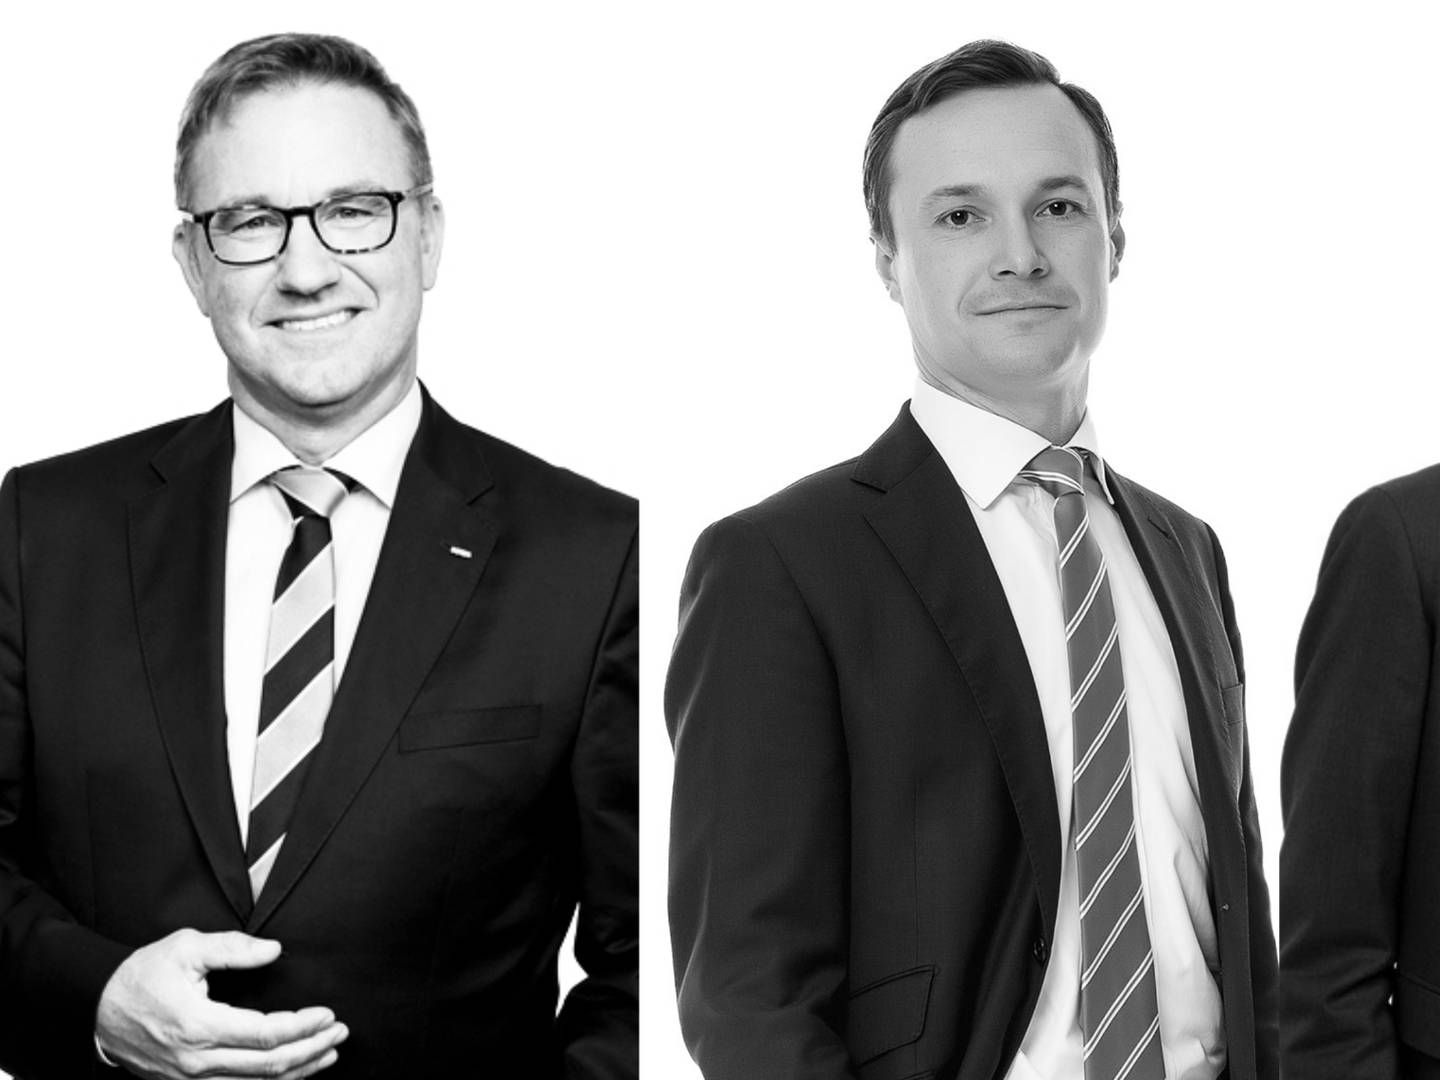 Hans Hellenborg, global head of Institutional product development at SEB (left), and portfolio managers Richard Gavel (center) and Björn Arvidsson (right). | Photo: Pr/seb